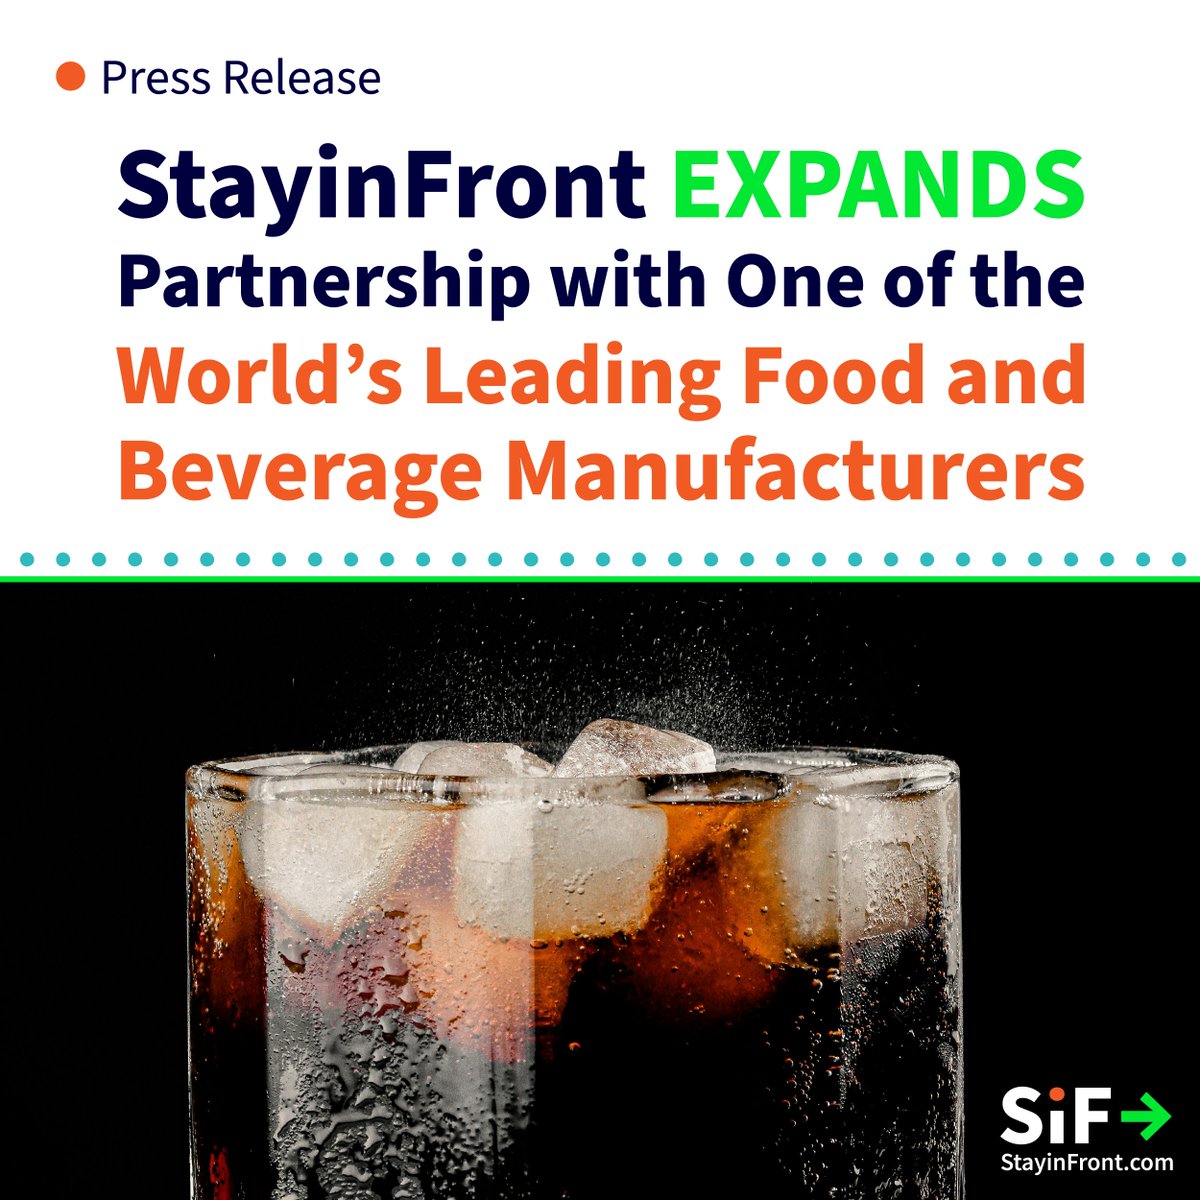 StayinFront expands its partnership in 2024 with one of the world's largest food and beverage manufacturers! Find out more in our latest press release here: ow.ly/9tU650RghBf

#RetailExecution #ConsumerGoods #CG #RetailTech #ROP #RetailOptimization #Beverage #SoftDrink